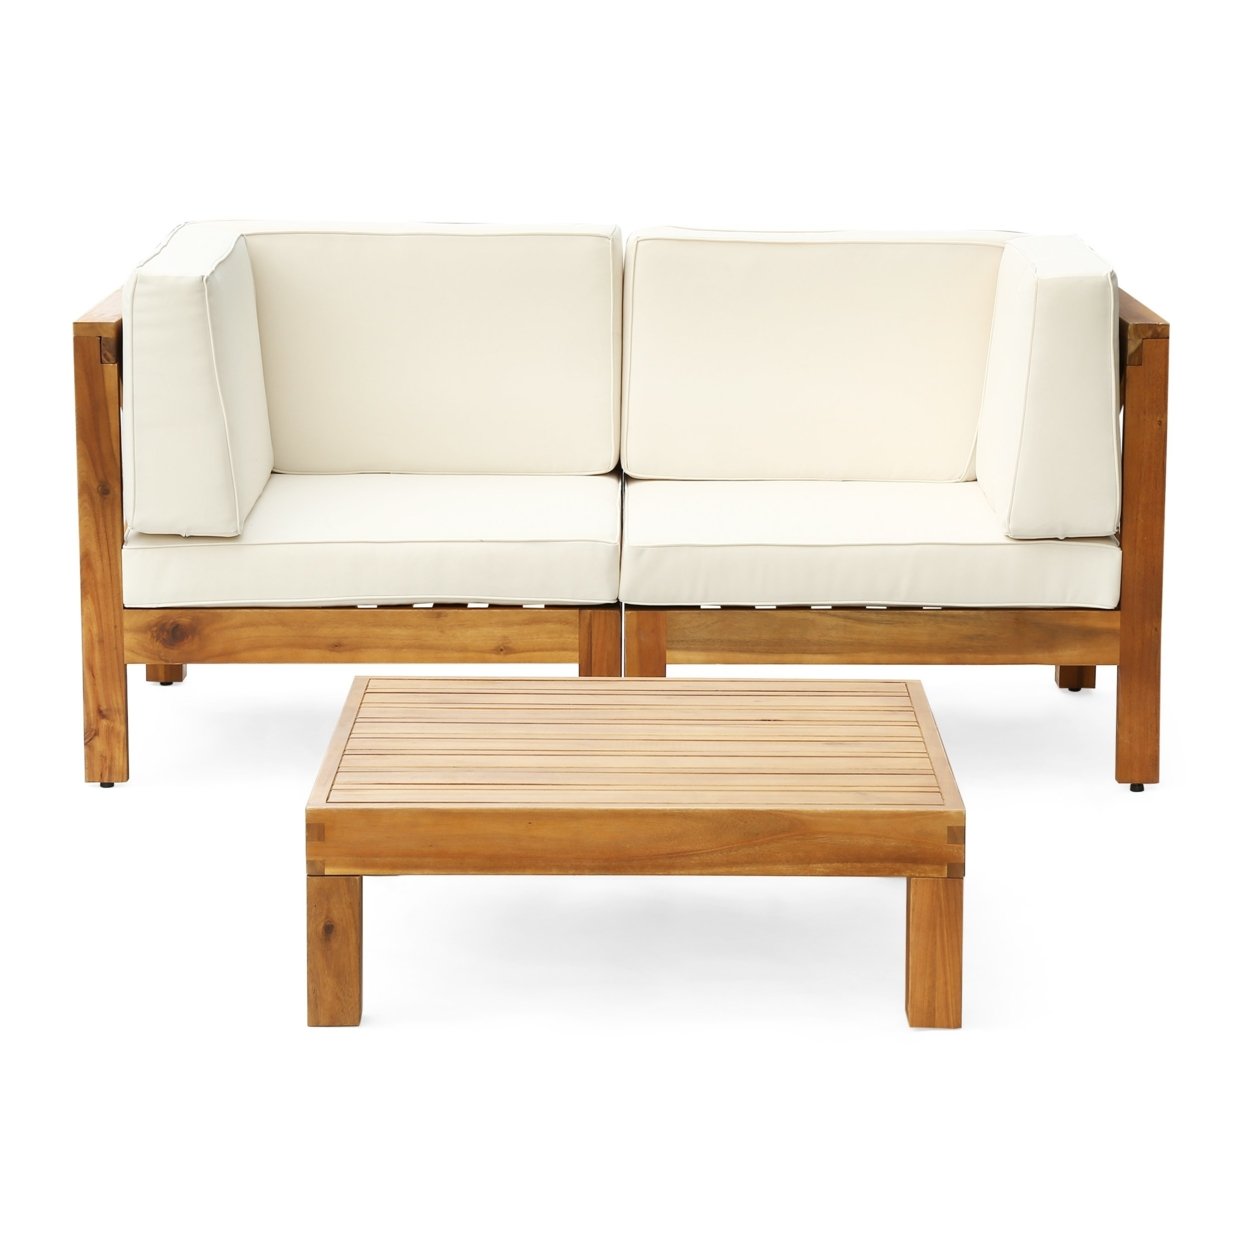 Dawson Outdoor Sectional Love Seat Set With Coffee Table - 3-Piece 2-Seater - Acacia Wood - Outdoor Cushions - Blue, Teak